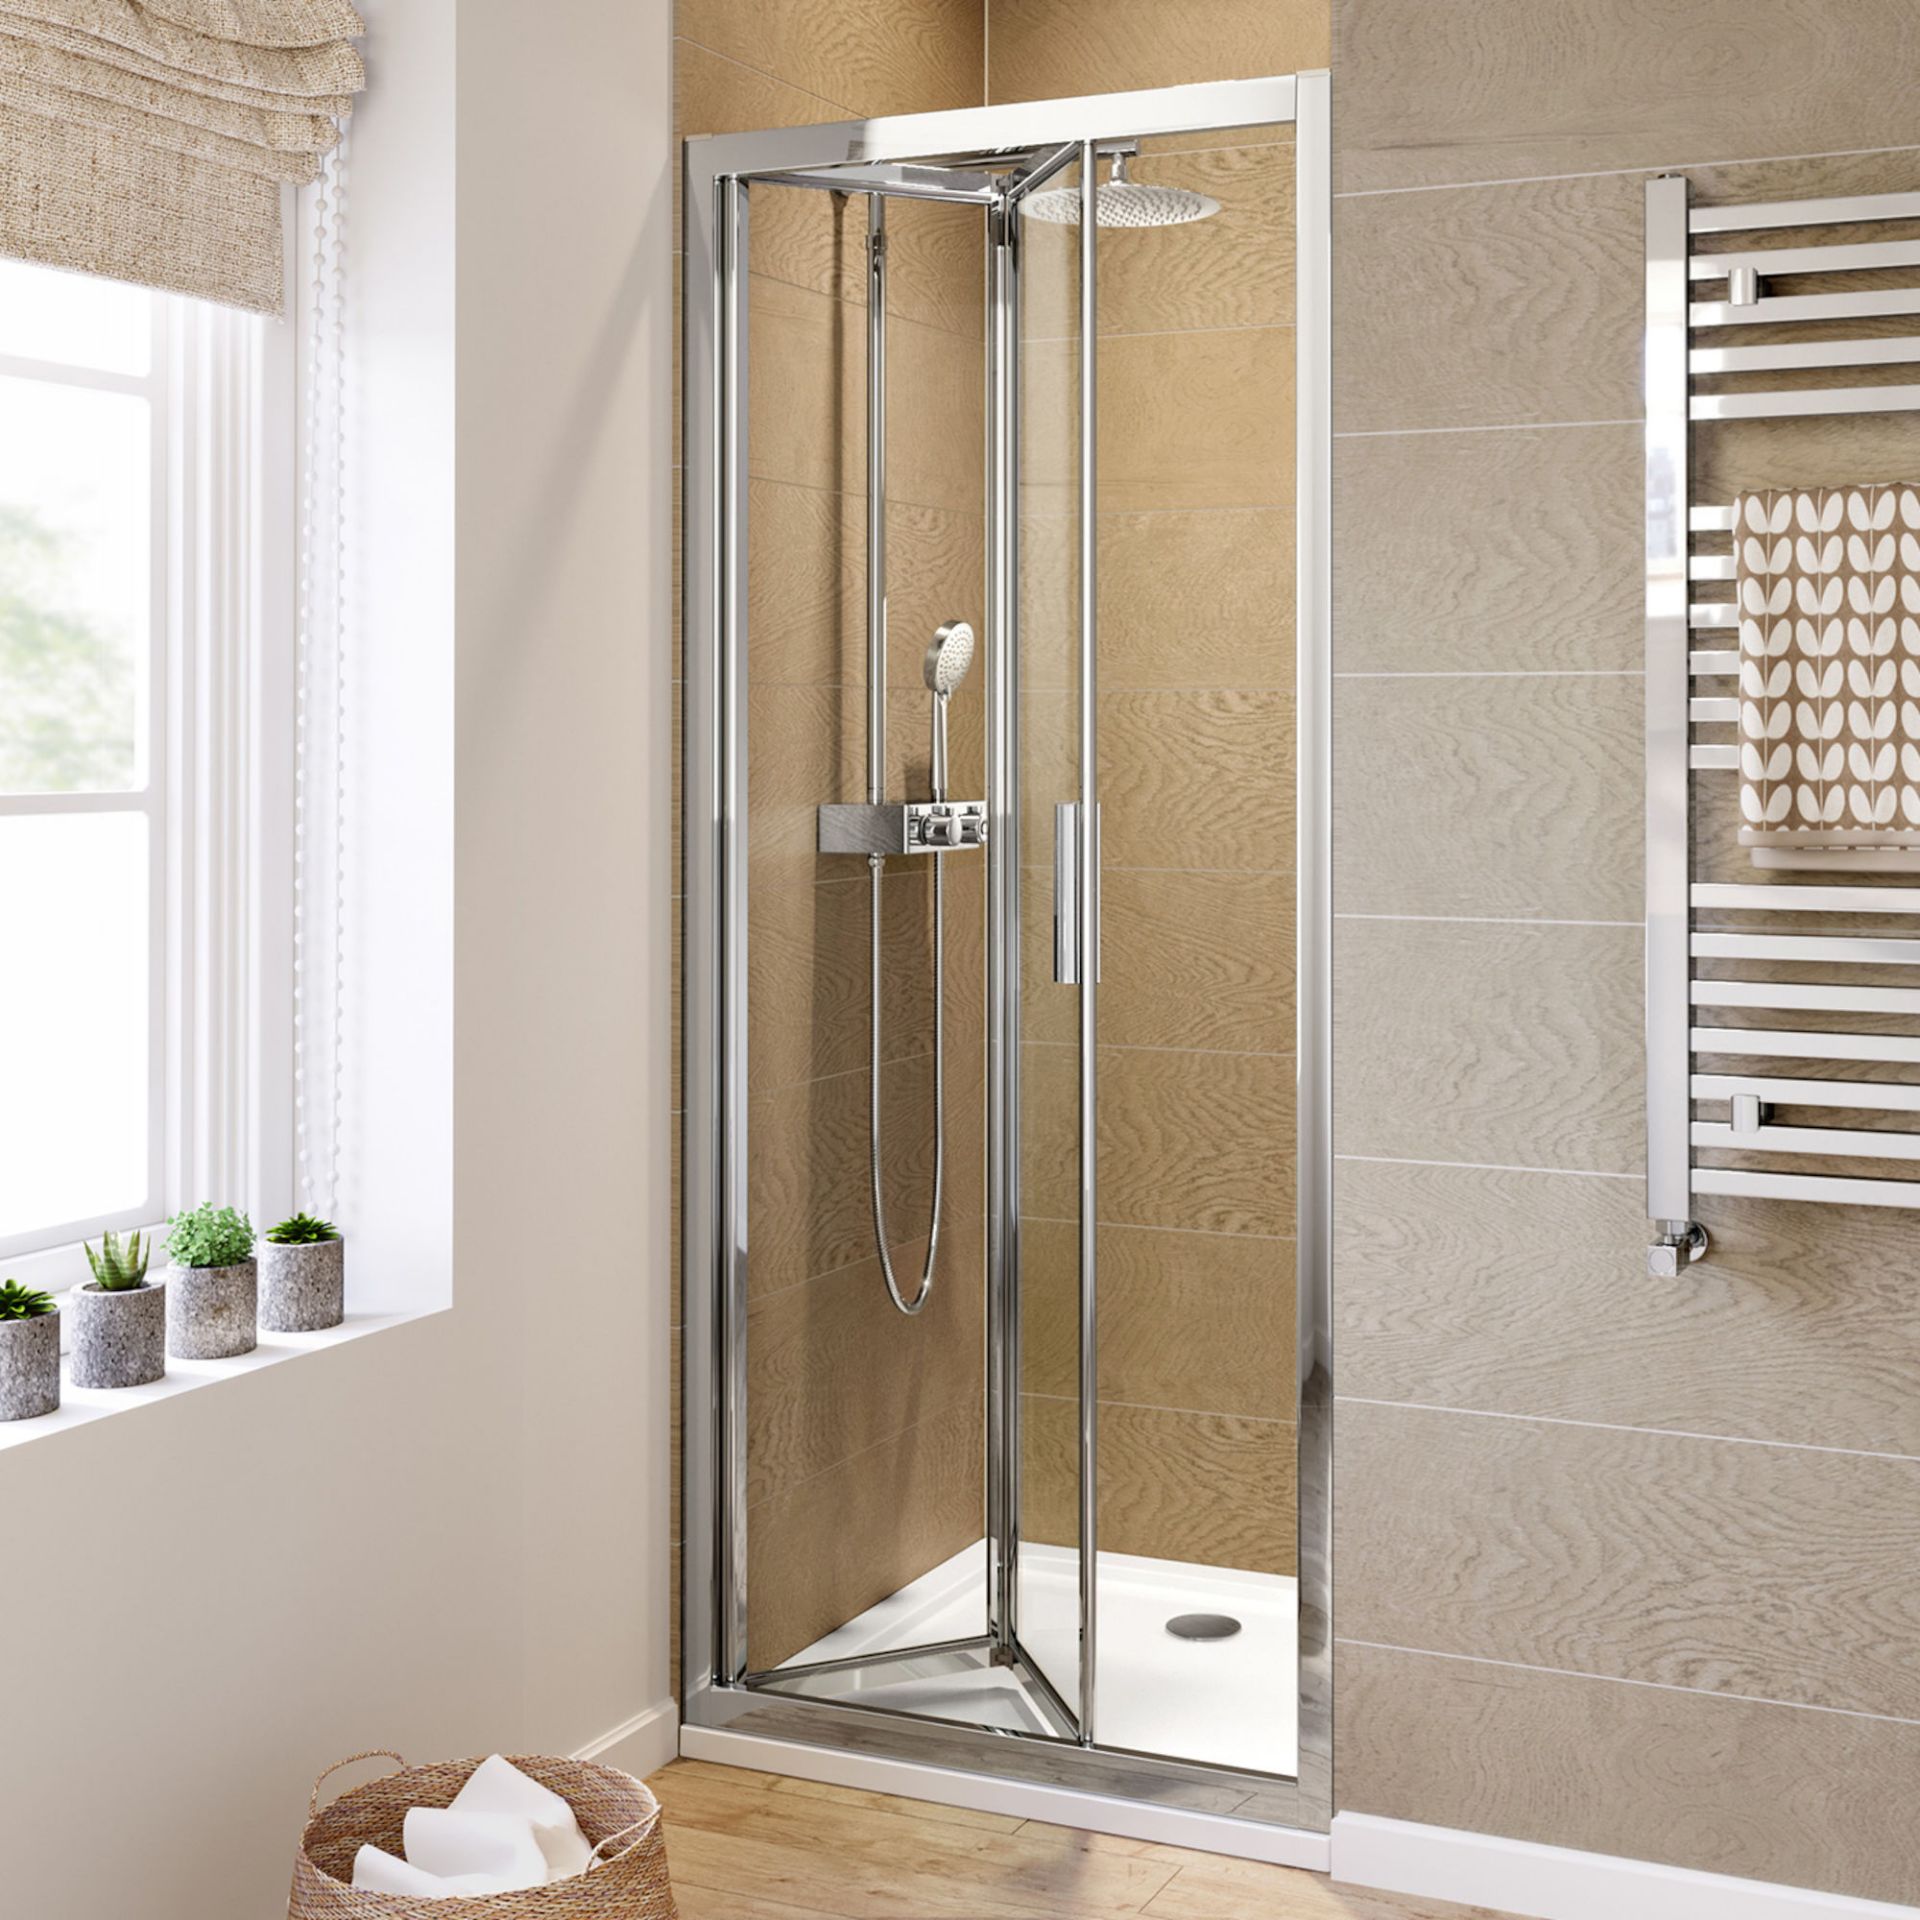 (AD282) 800mm - 6mm - Elements EasyClean Bifold Shower Door. RRP £299.99. 6mm Safety Glass -